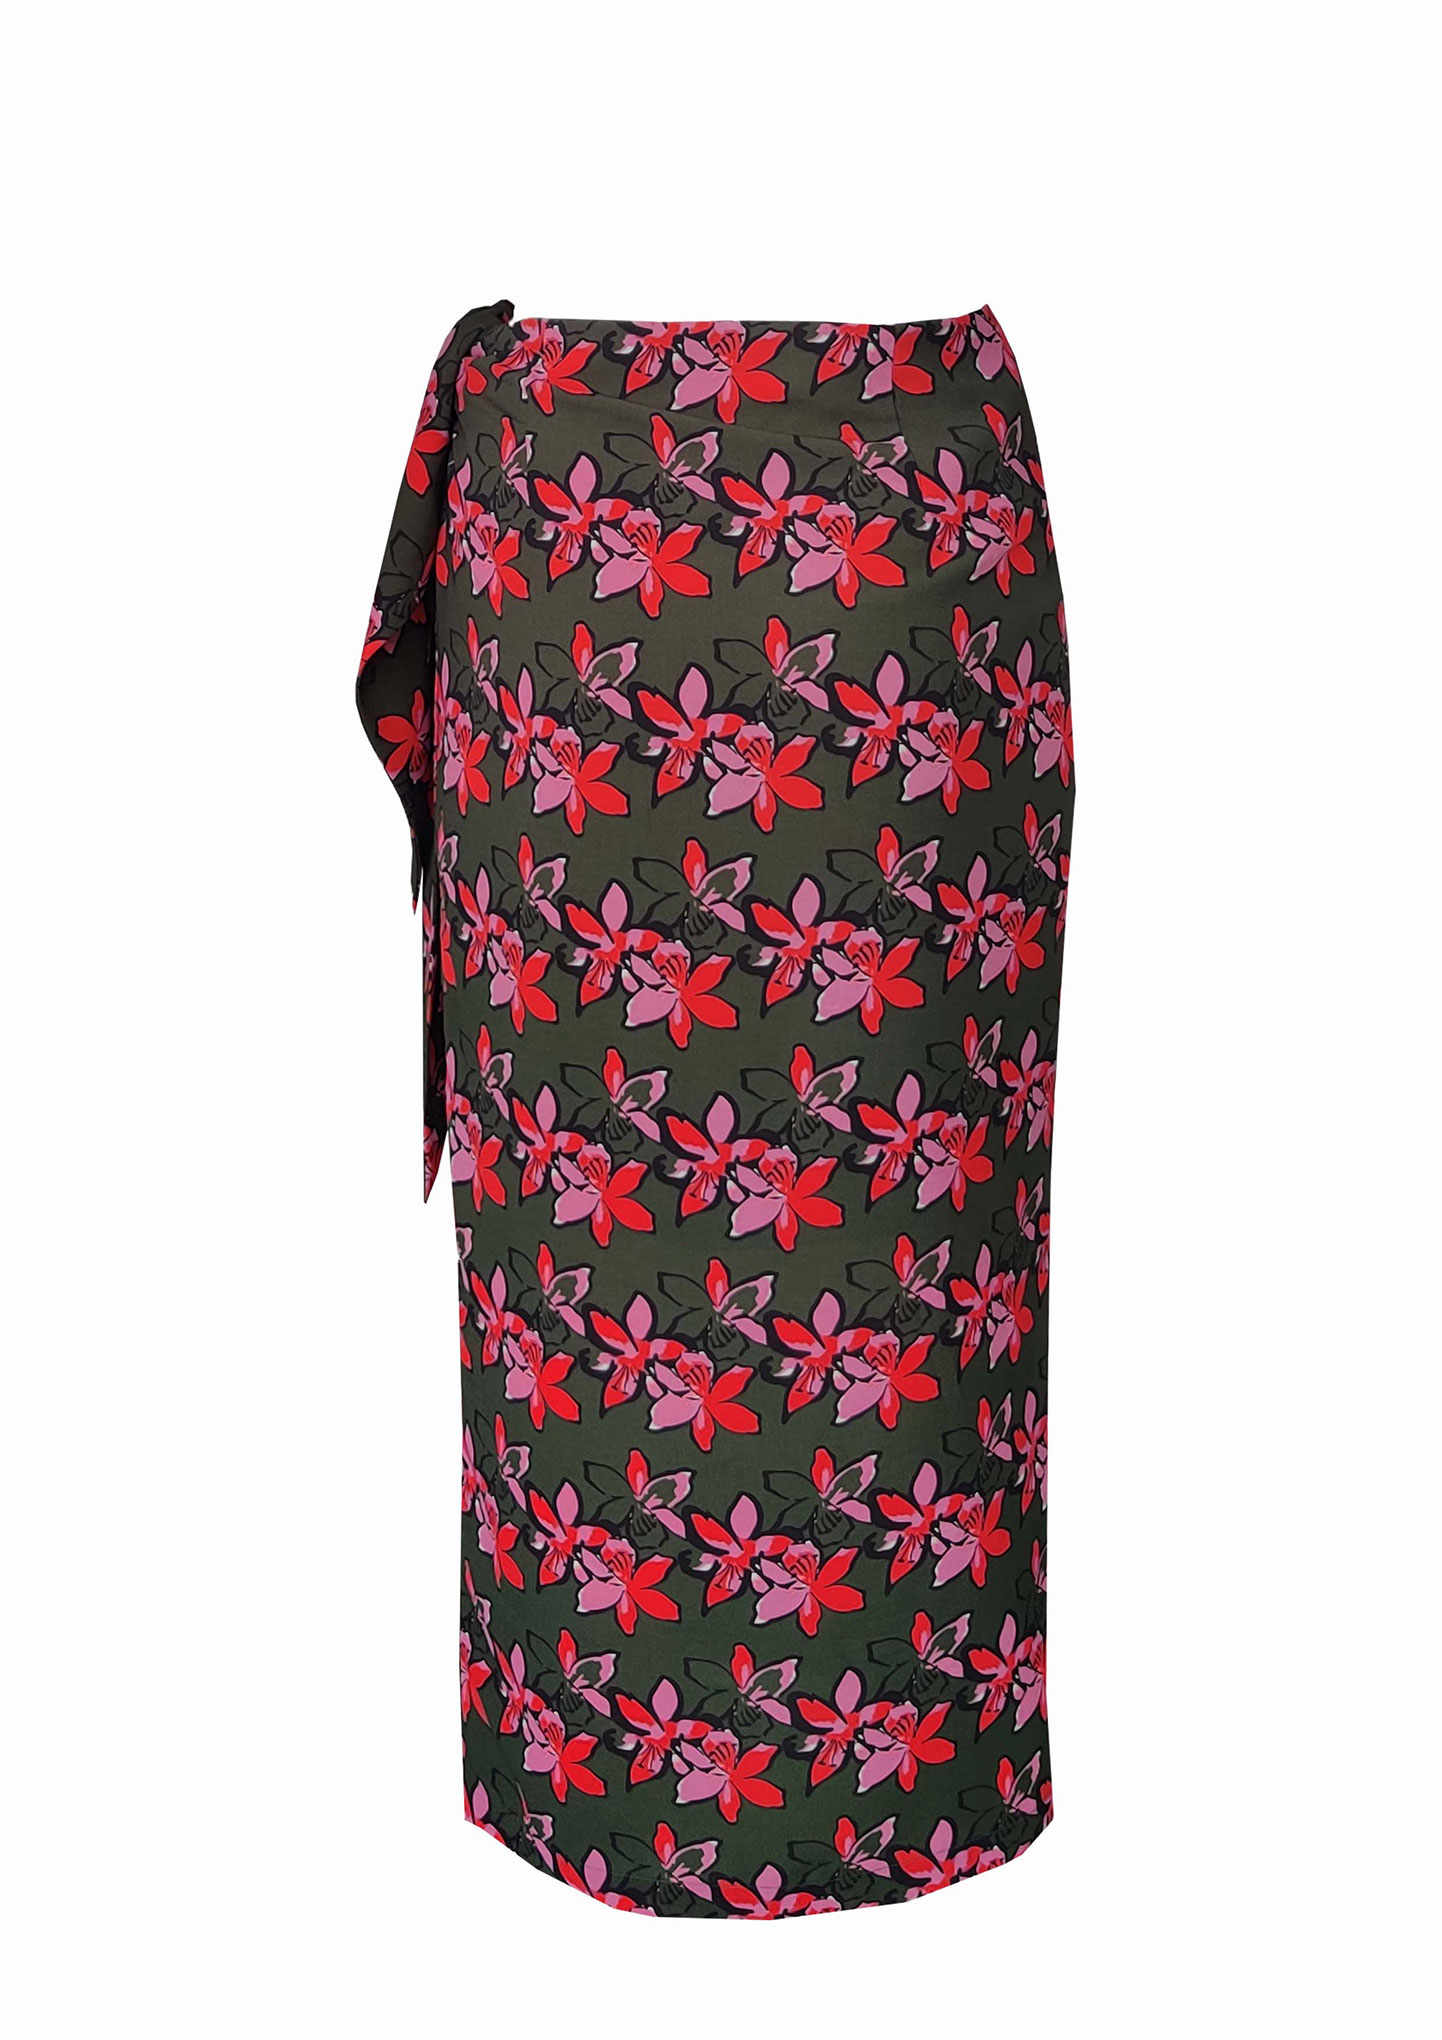 Green Floral Wrapover Skirt Rfd